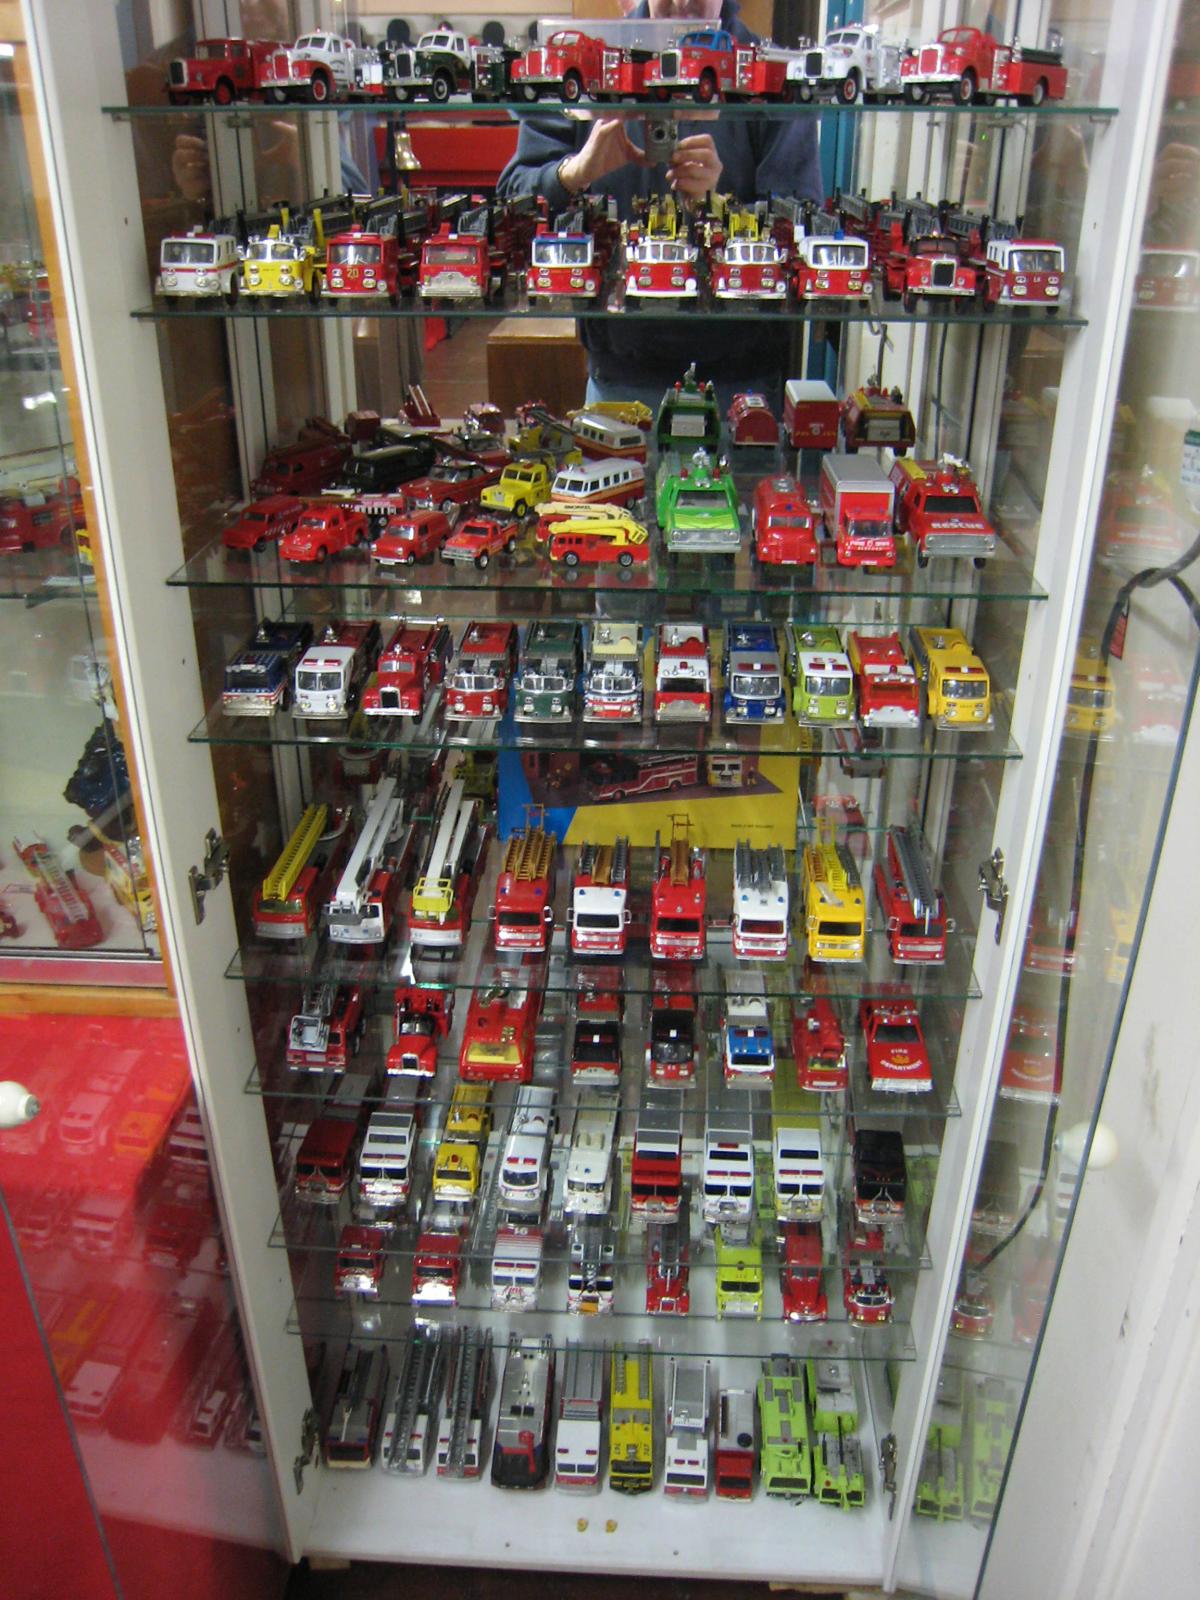 A small portion of Steve's fire engines. (Caters News)